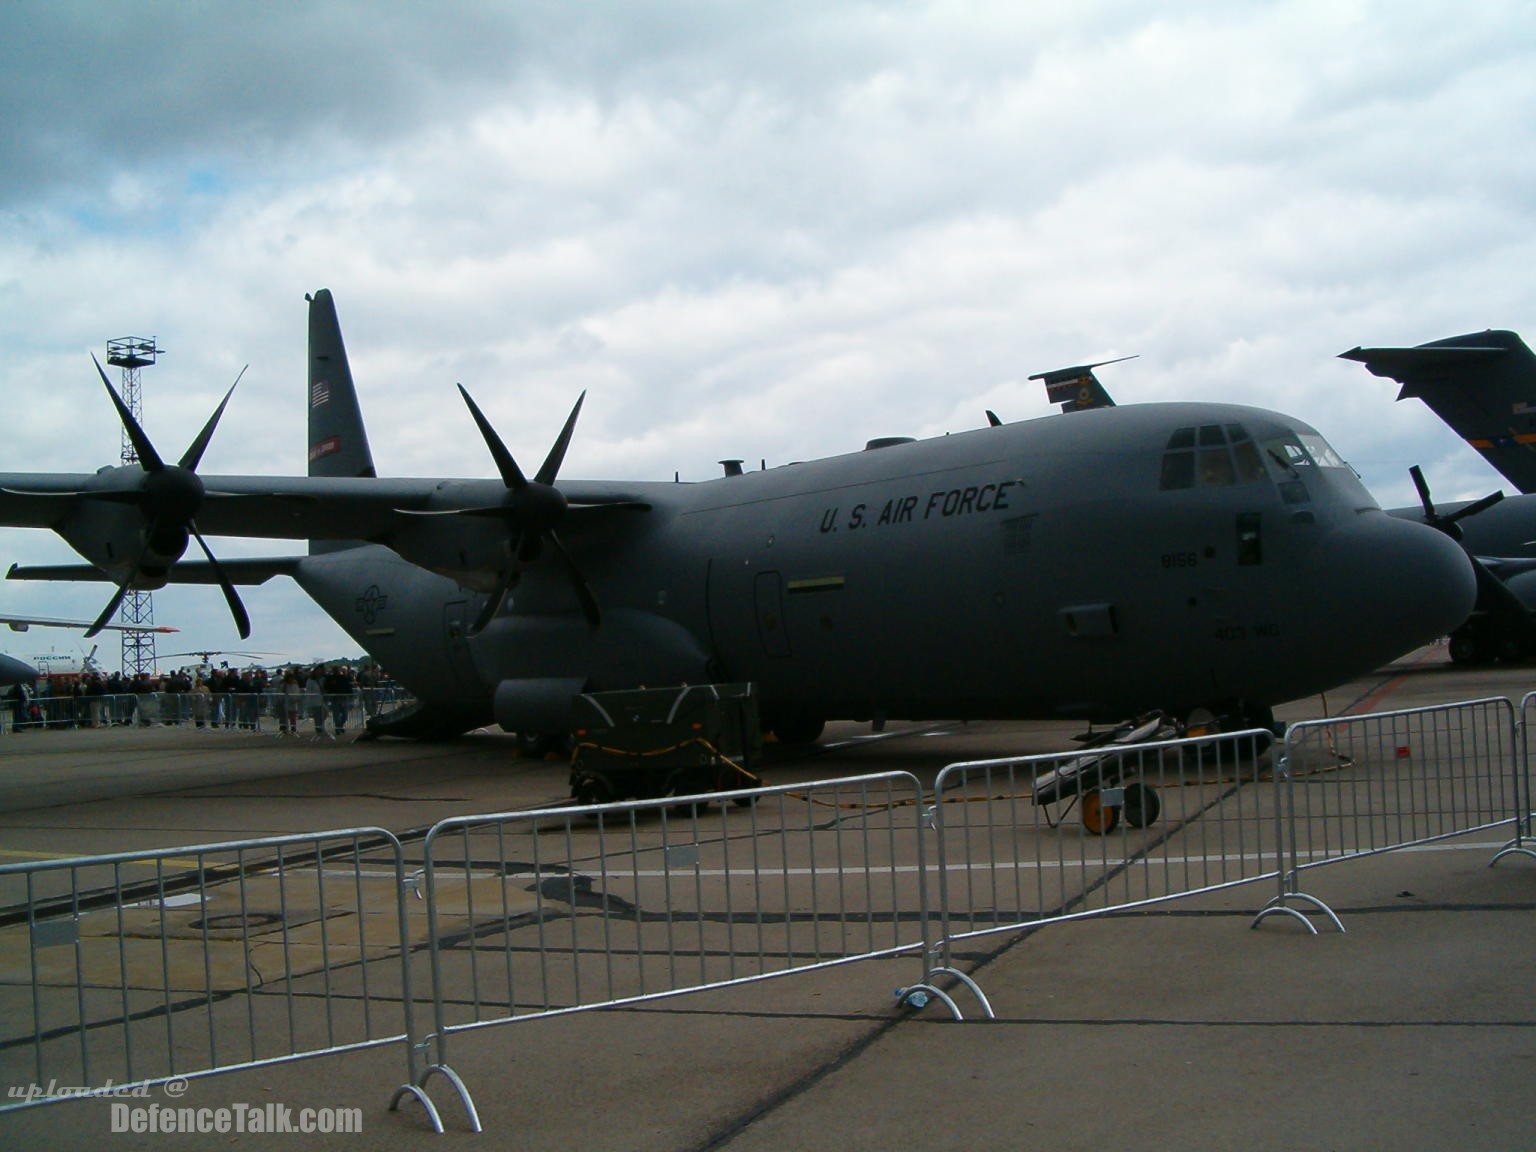 US Air Force (USAF) C-130 at the ILA2006 Air Show